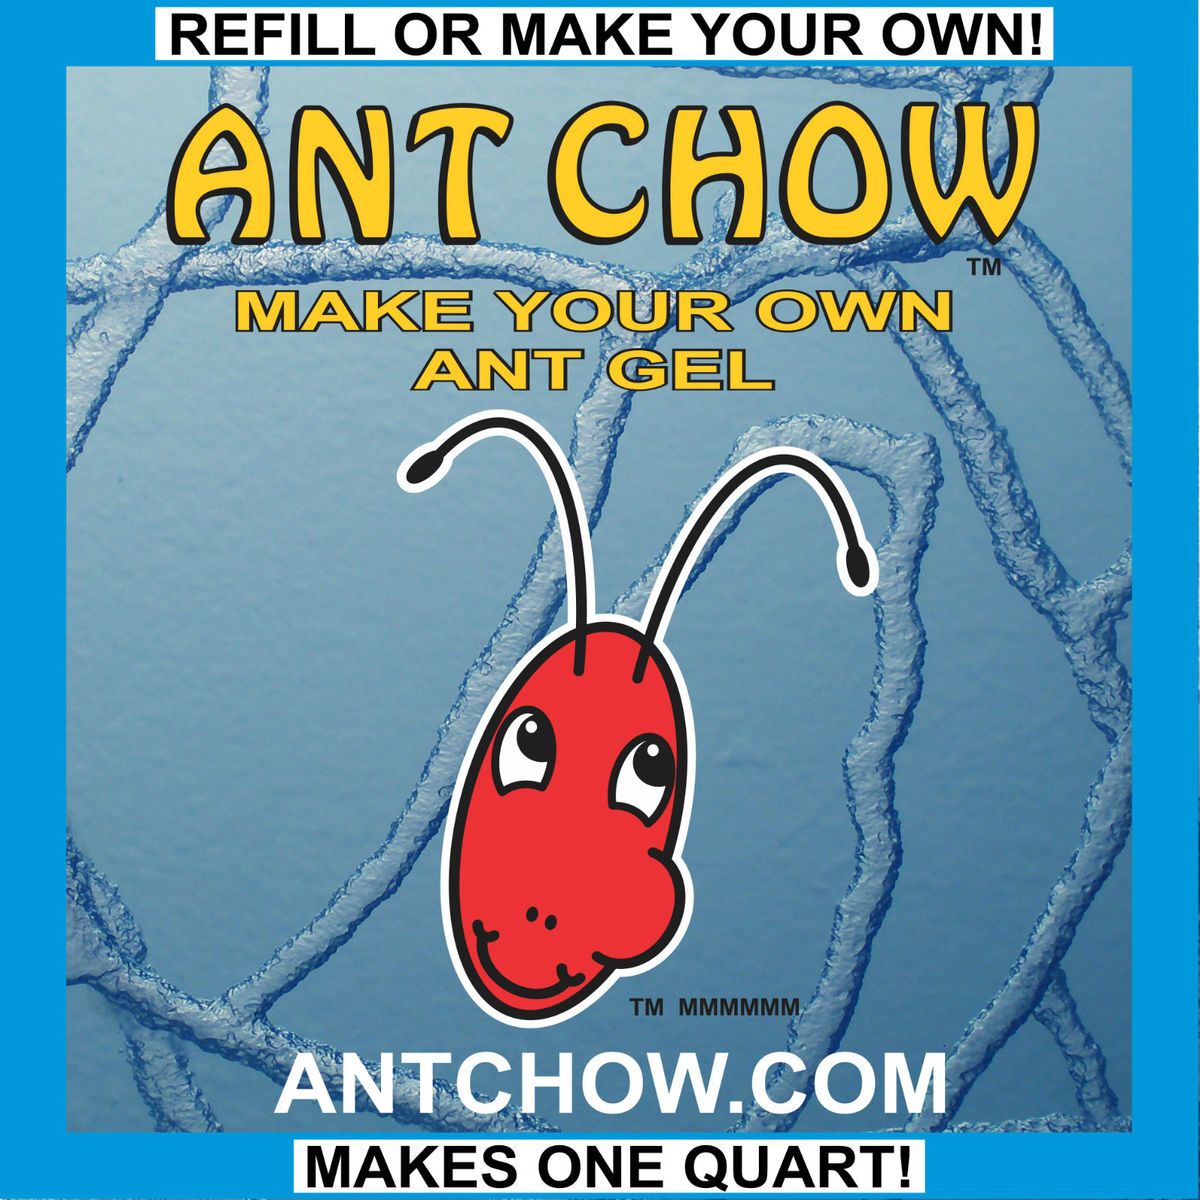 Ant Chow Refills Two or More Gel Ant Farms